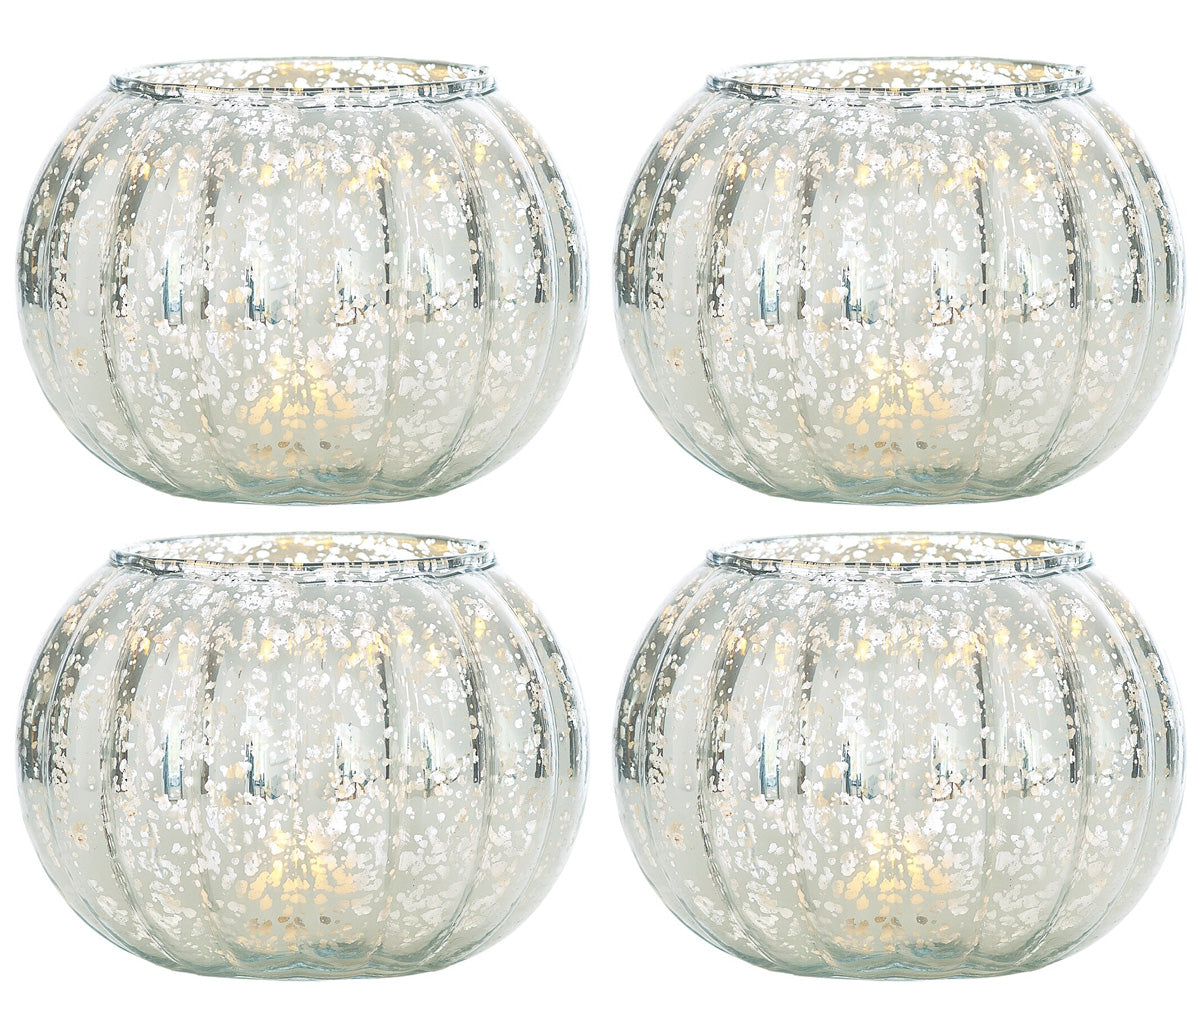 4 Pack | Small Vintage Mercury Glass Candle Holder (3.5-Inch, Autumn Design, Silver) - For Home Decor, Party Decorations, and Wedding Centerpieces - PaperLanternStore.com - Paper Lanterns, Decor, Party Lights & More